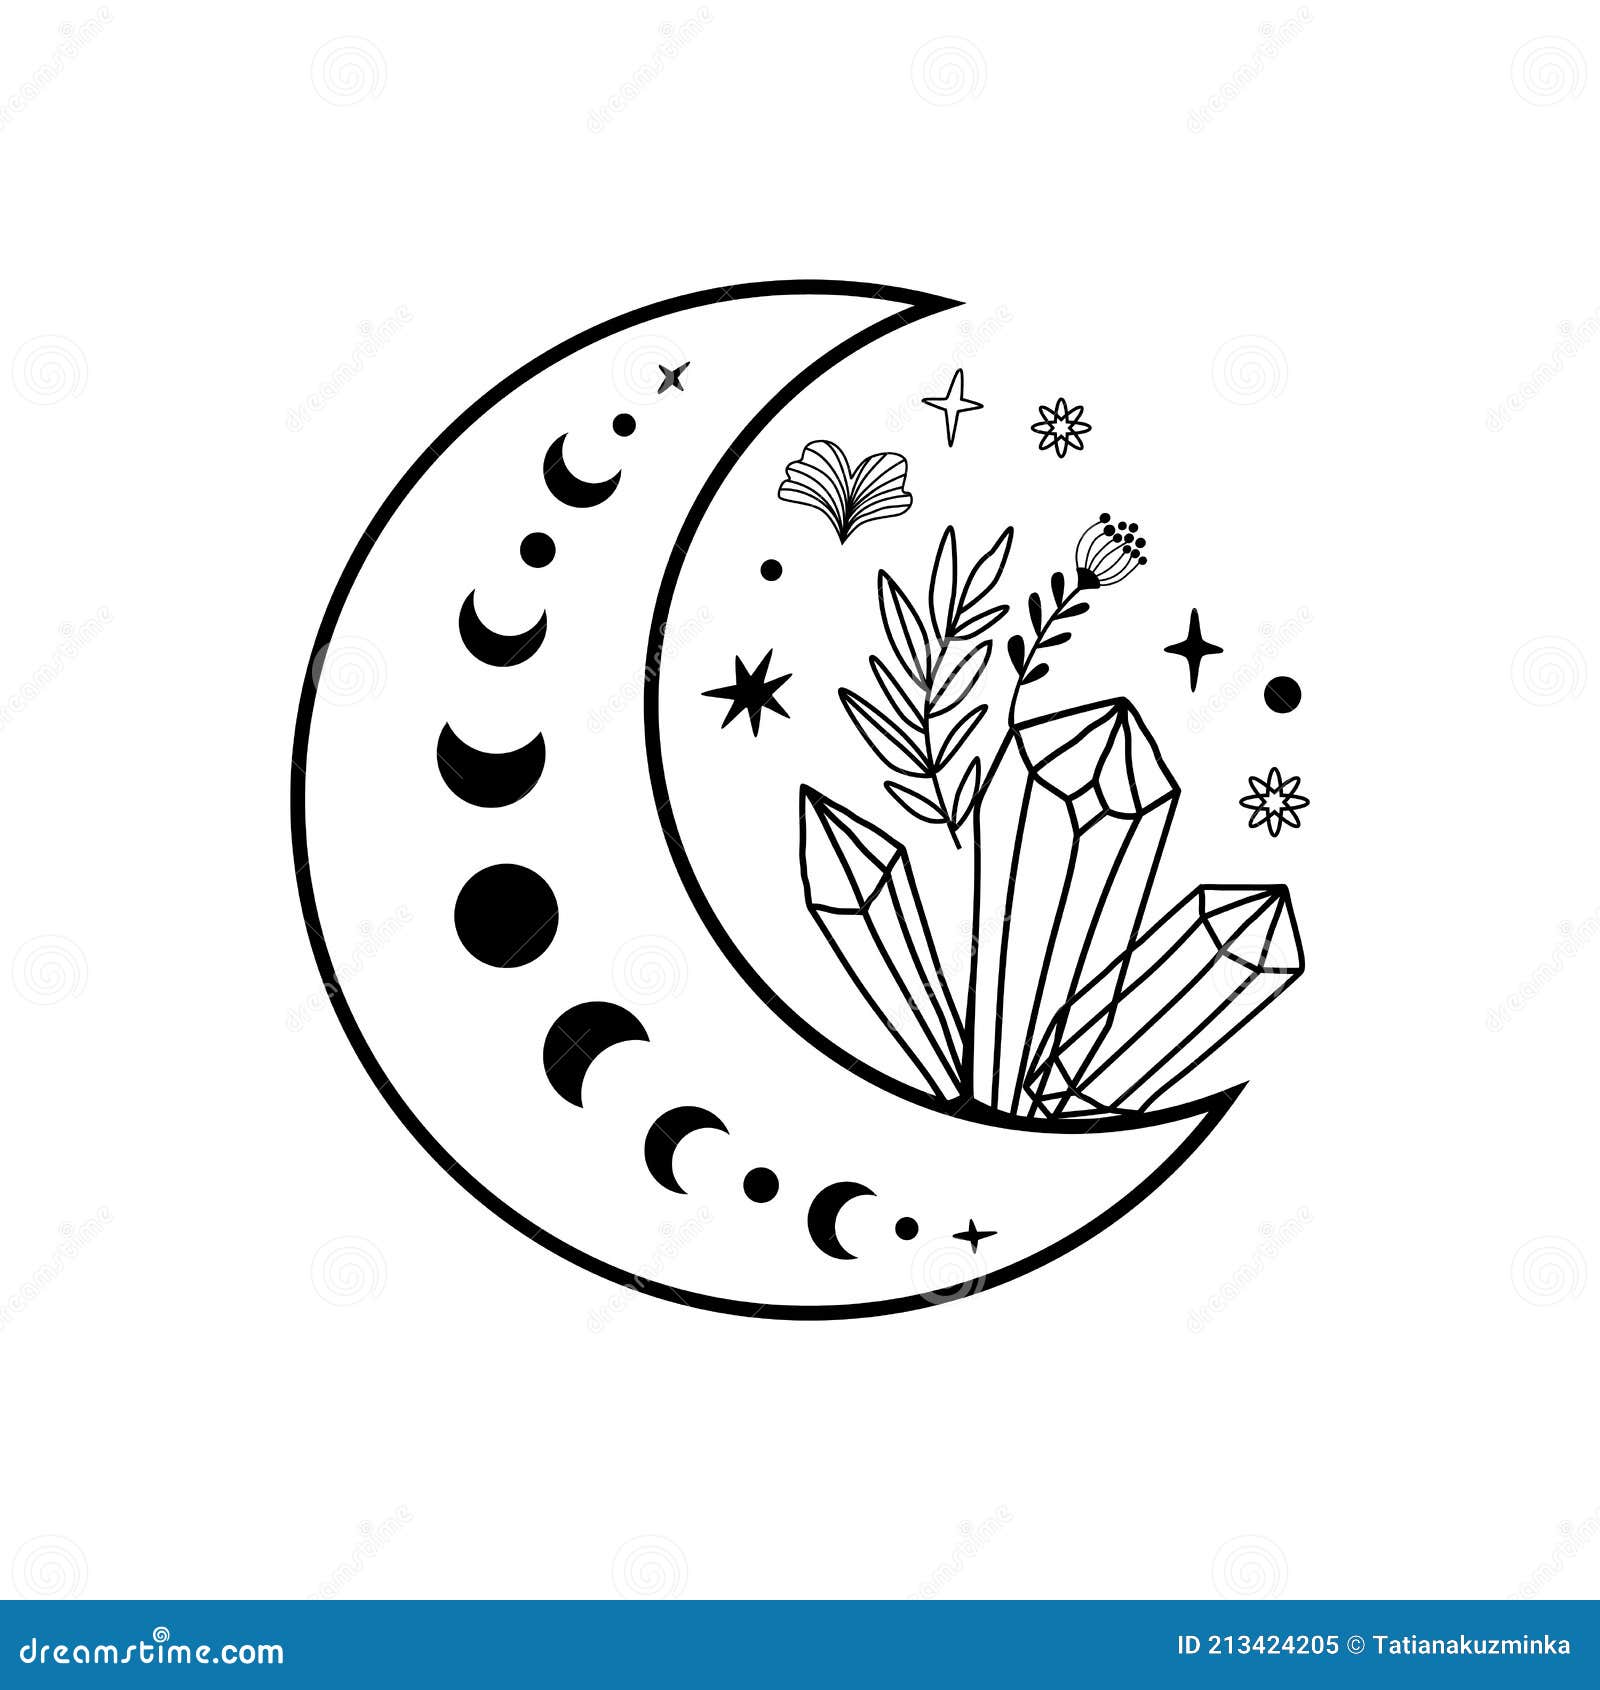 21244 Moon Tattoo Stock Photos and Images  123RF